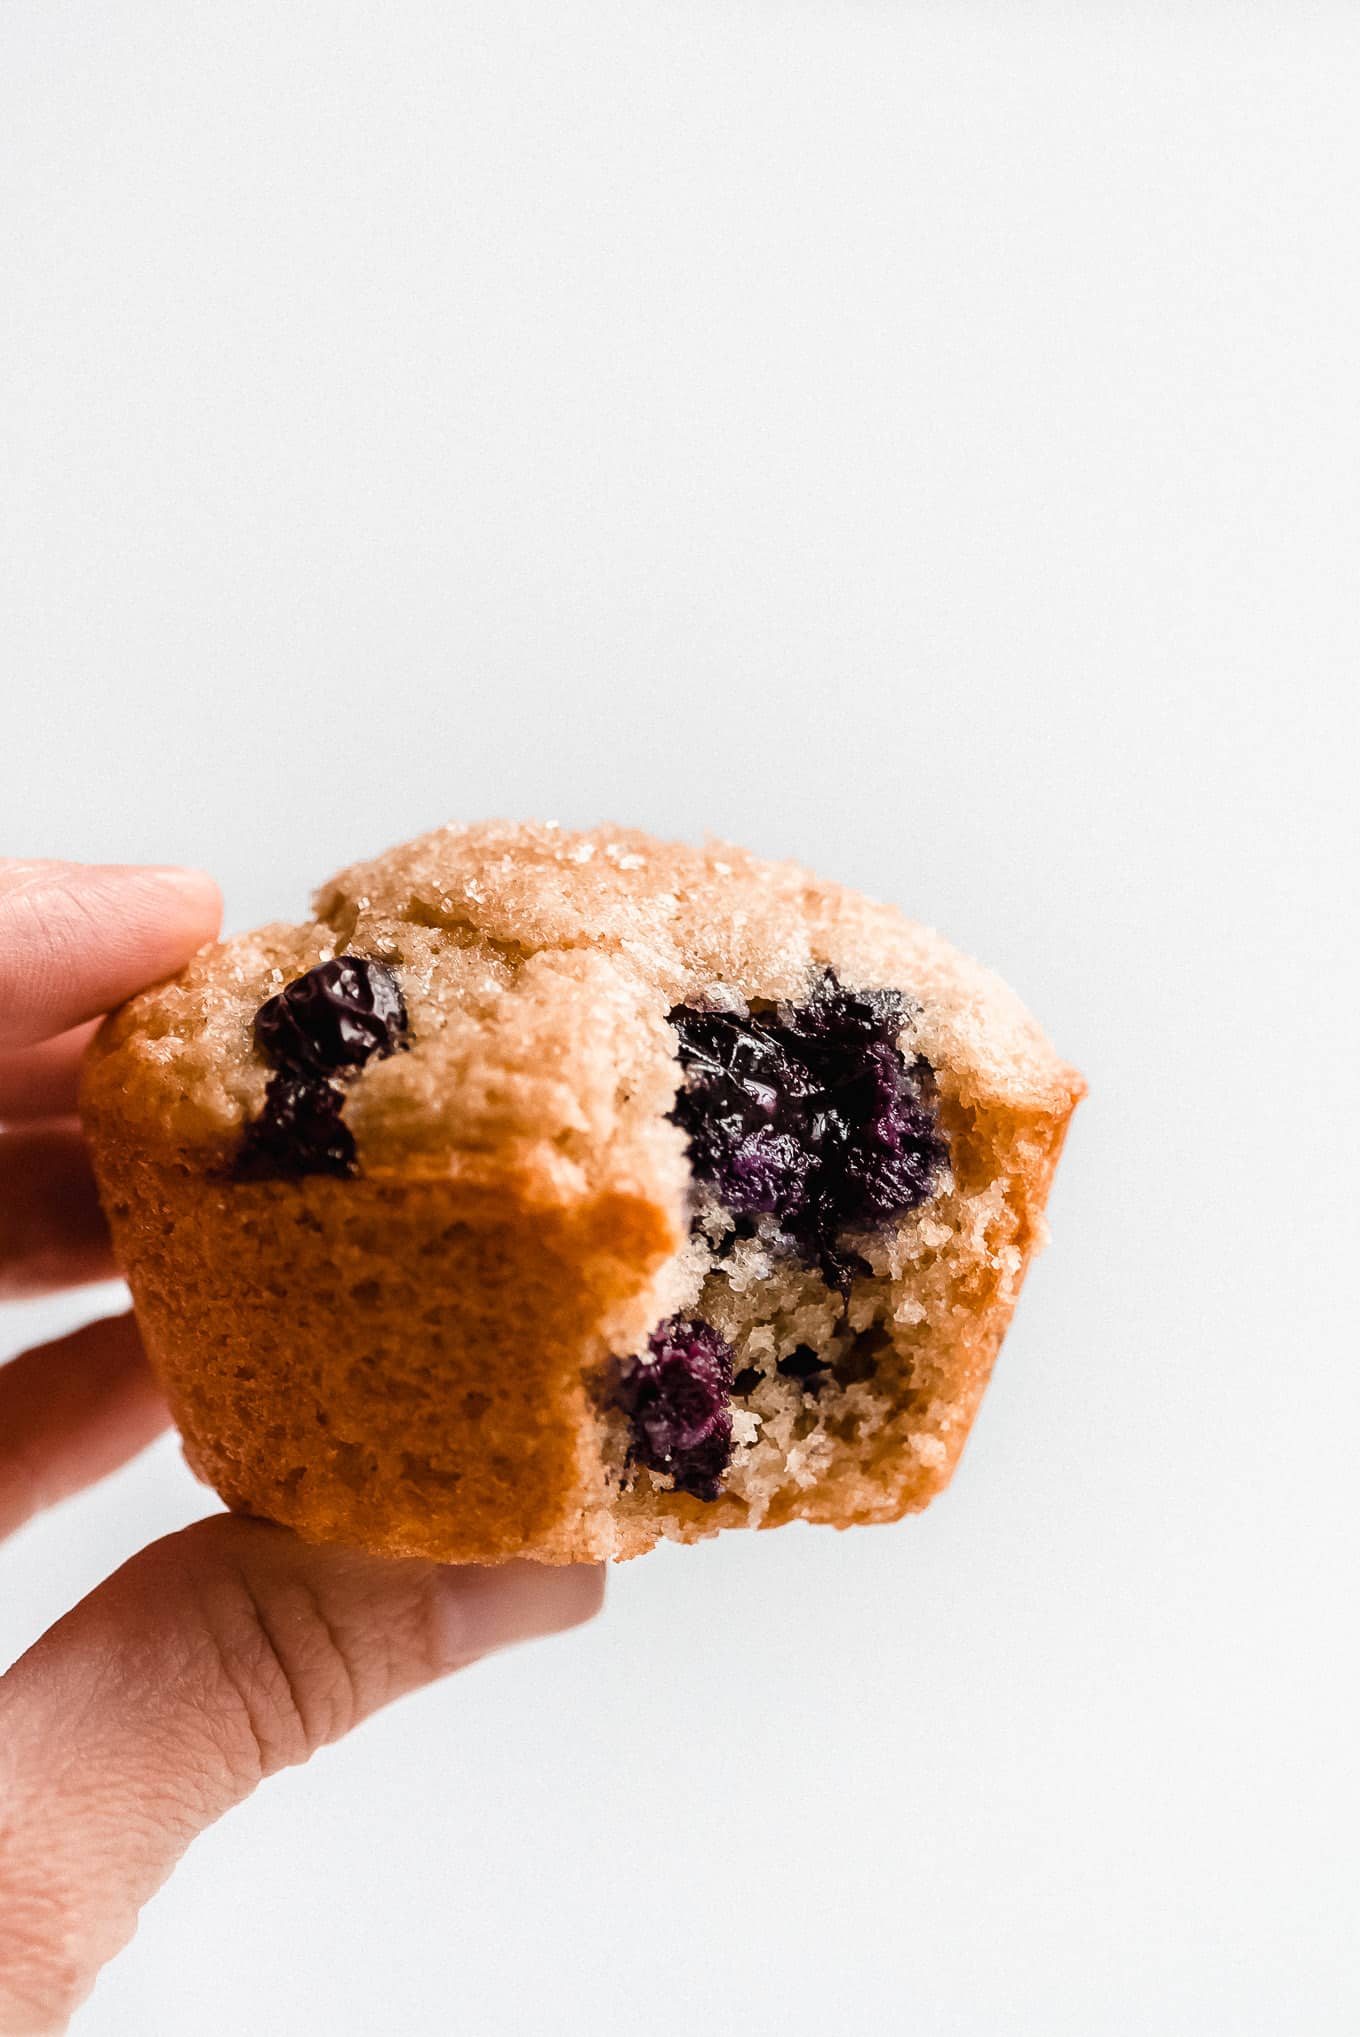 Holding a Greek Yogurt Blueberry Muffin that has a bite taken out, revealing a burst blueberry and the moist tender crumb of the muffin.